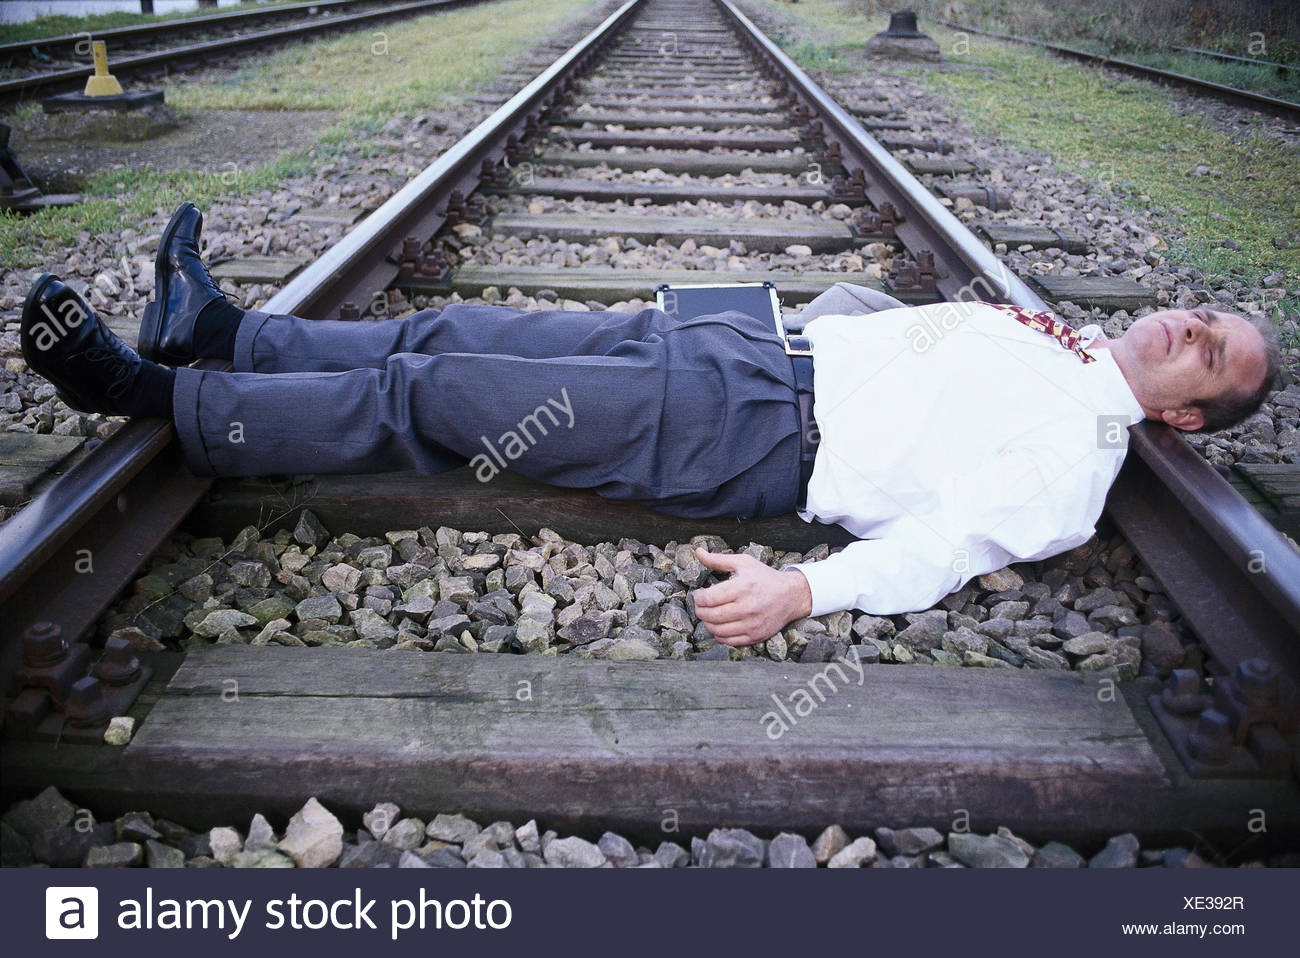 businessman-desperately-lie-tracks-attempted-suicide-business-manager-loss-ruin-failure-bankruptcy-ruins-hopelessness-hopelessness-resignation-facial-play-desperation-discourages-weary-life-suicide-suicide-suicide-attempt-train-tracks-XE392R.jpg